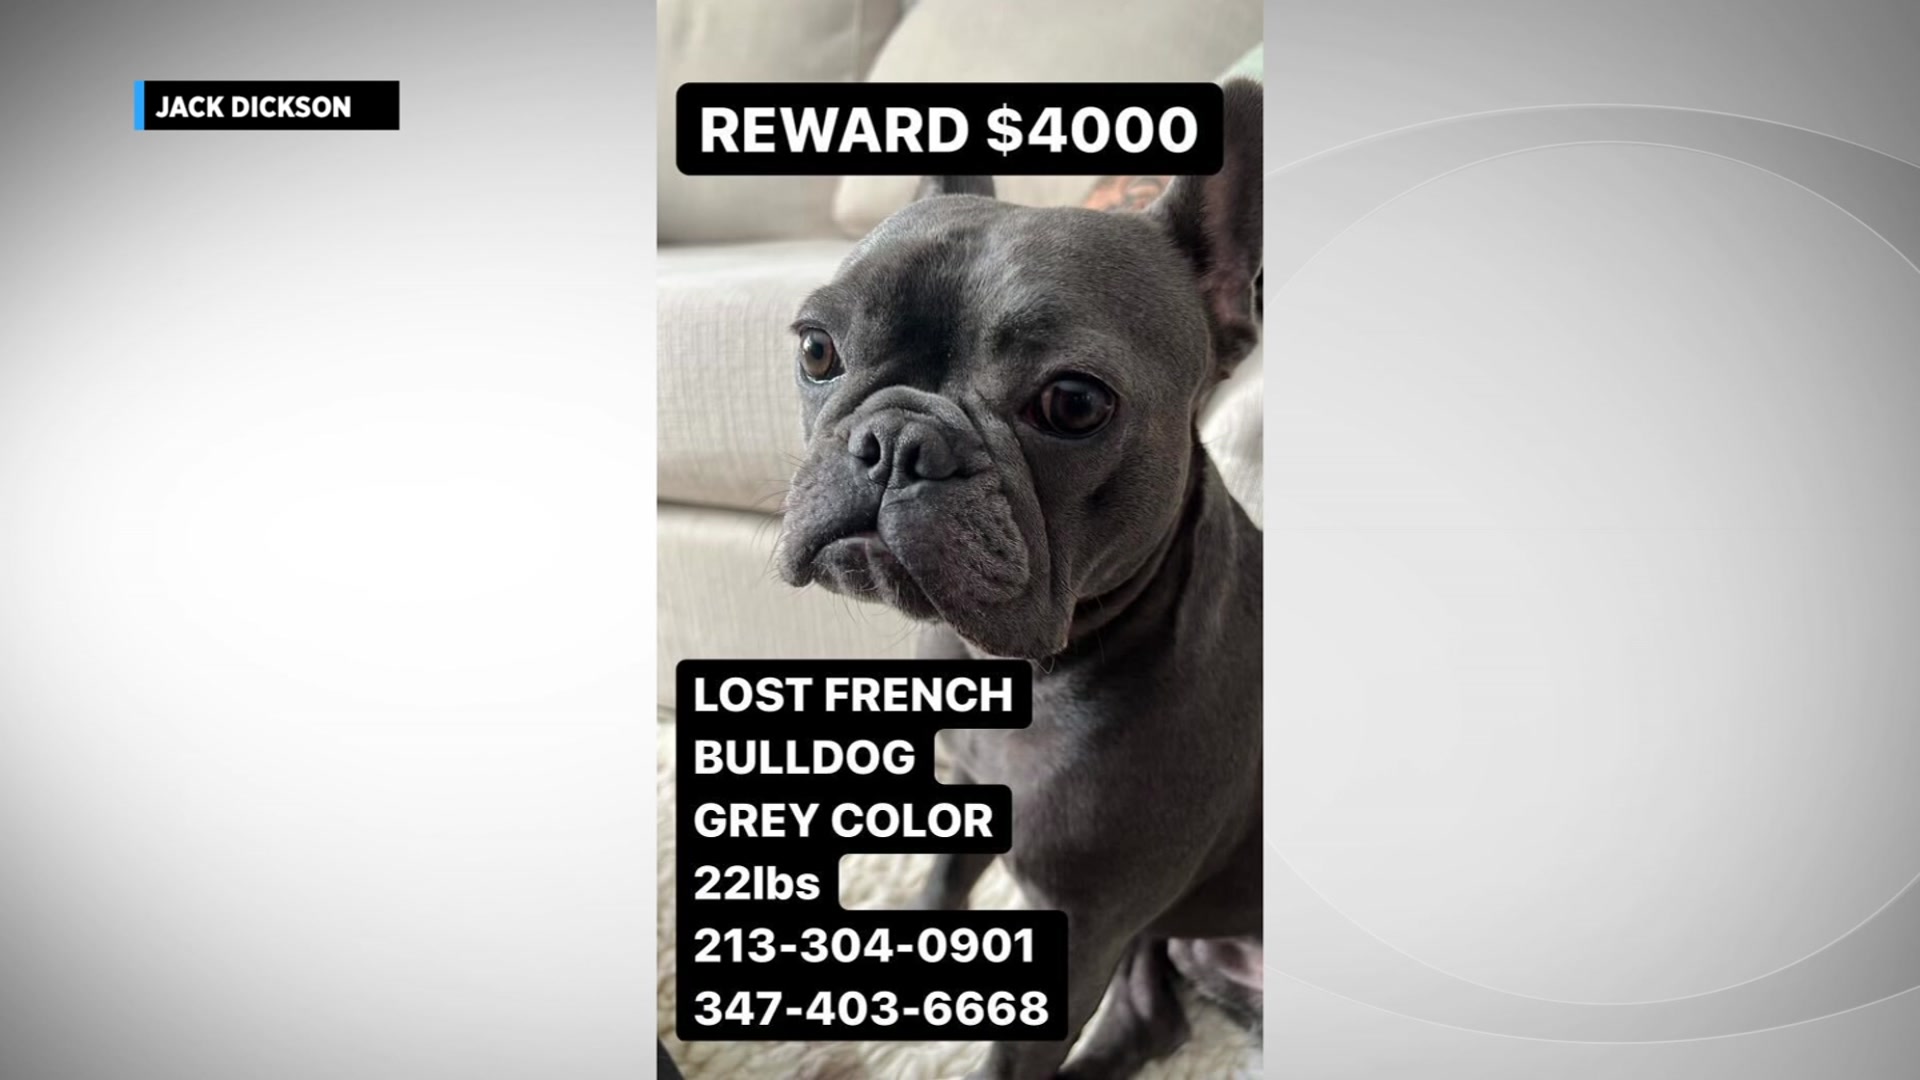 Miami Couple Expands Search For Their French Bulldog That May Have Been Stolen: ‘I Just Want Him Back’